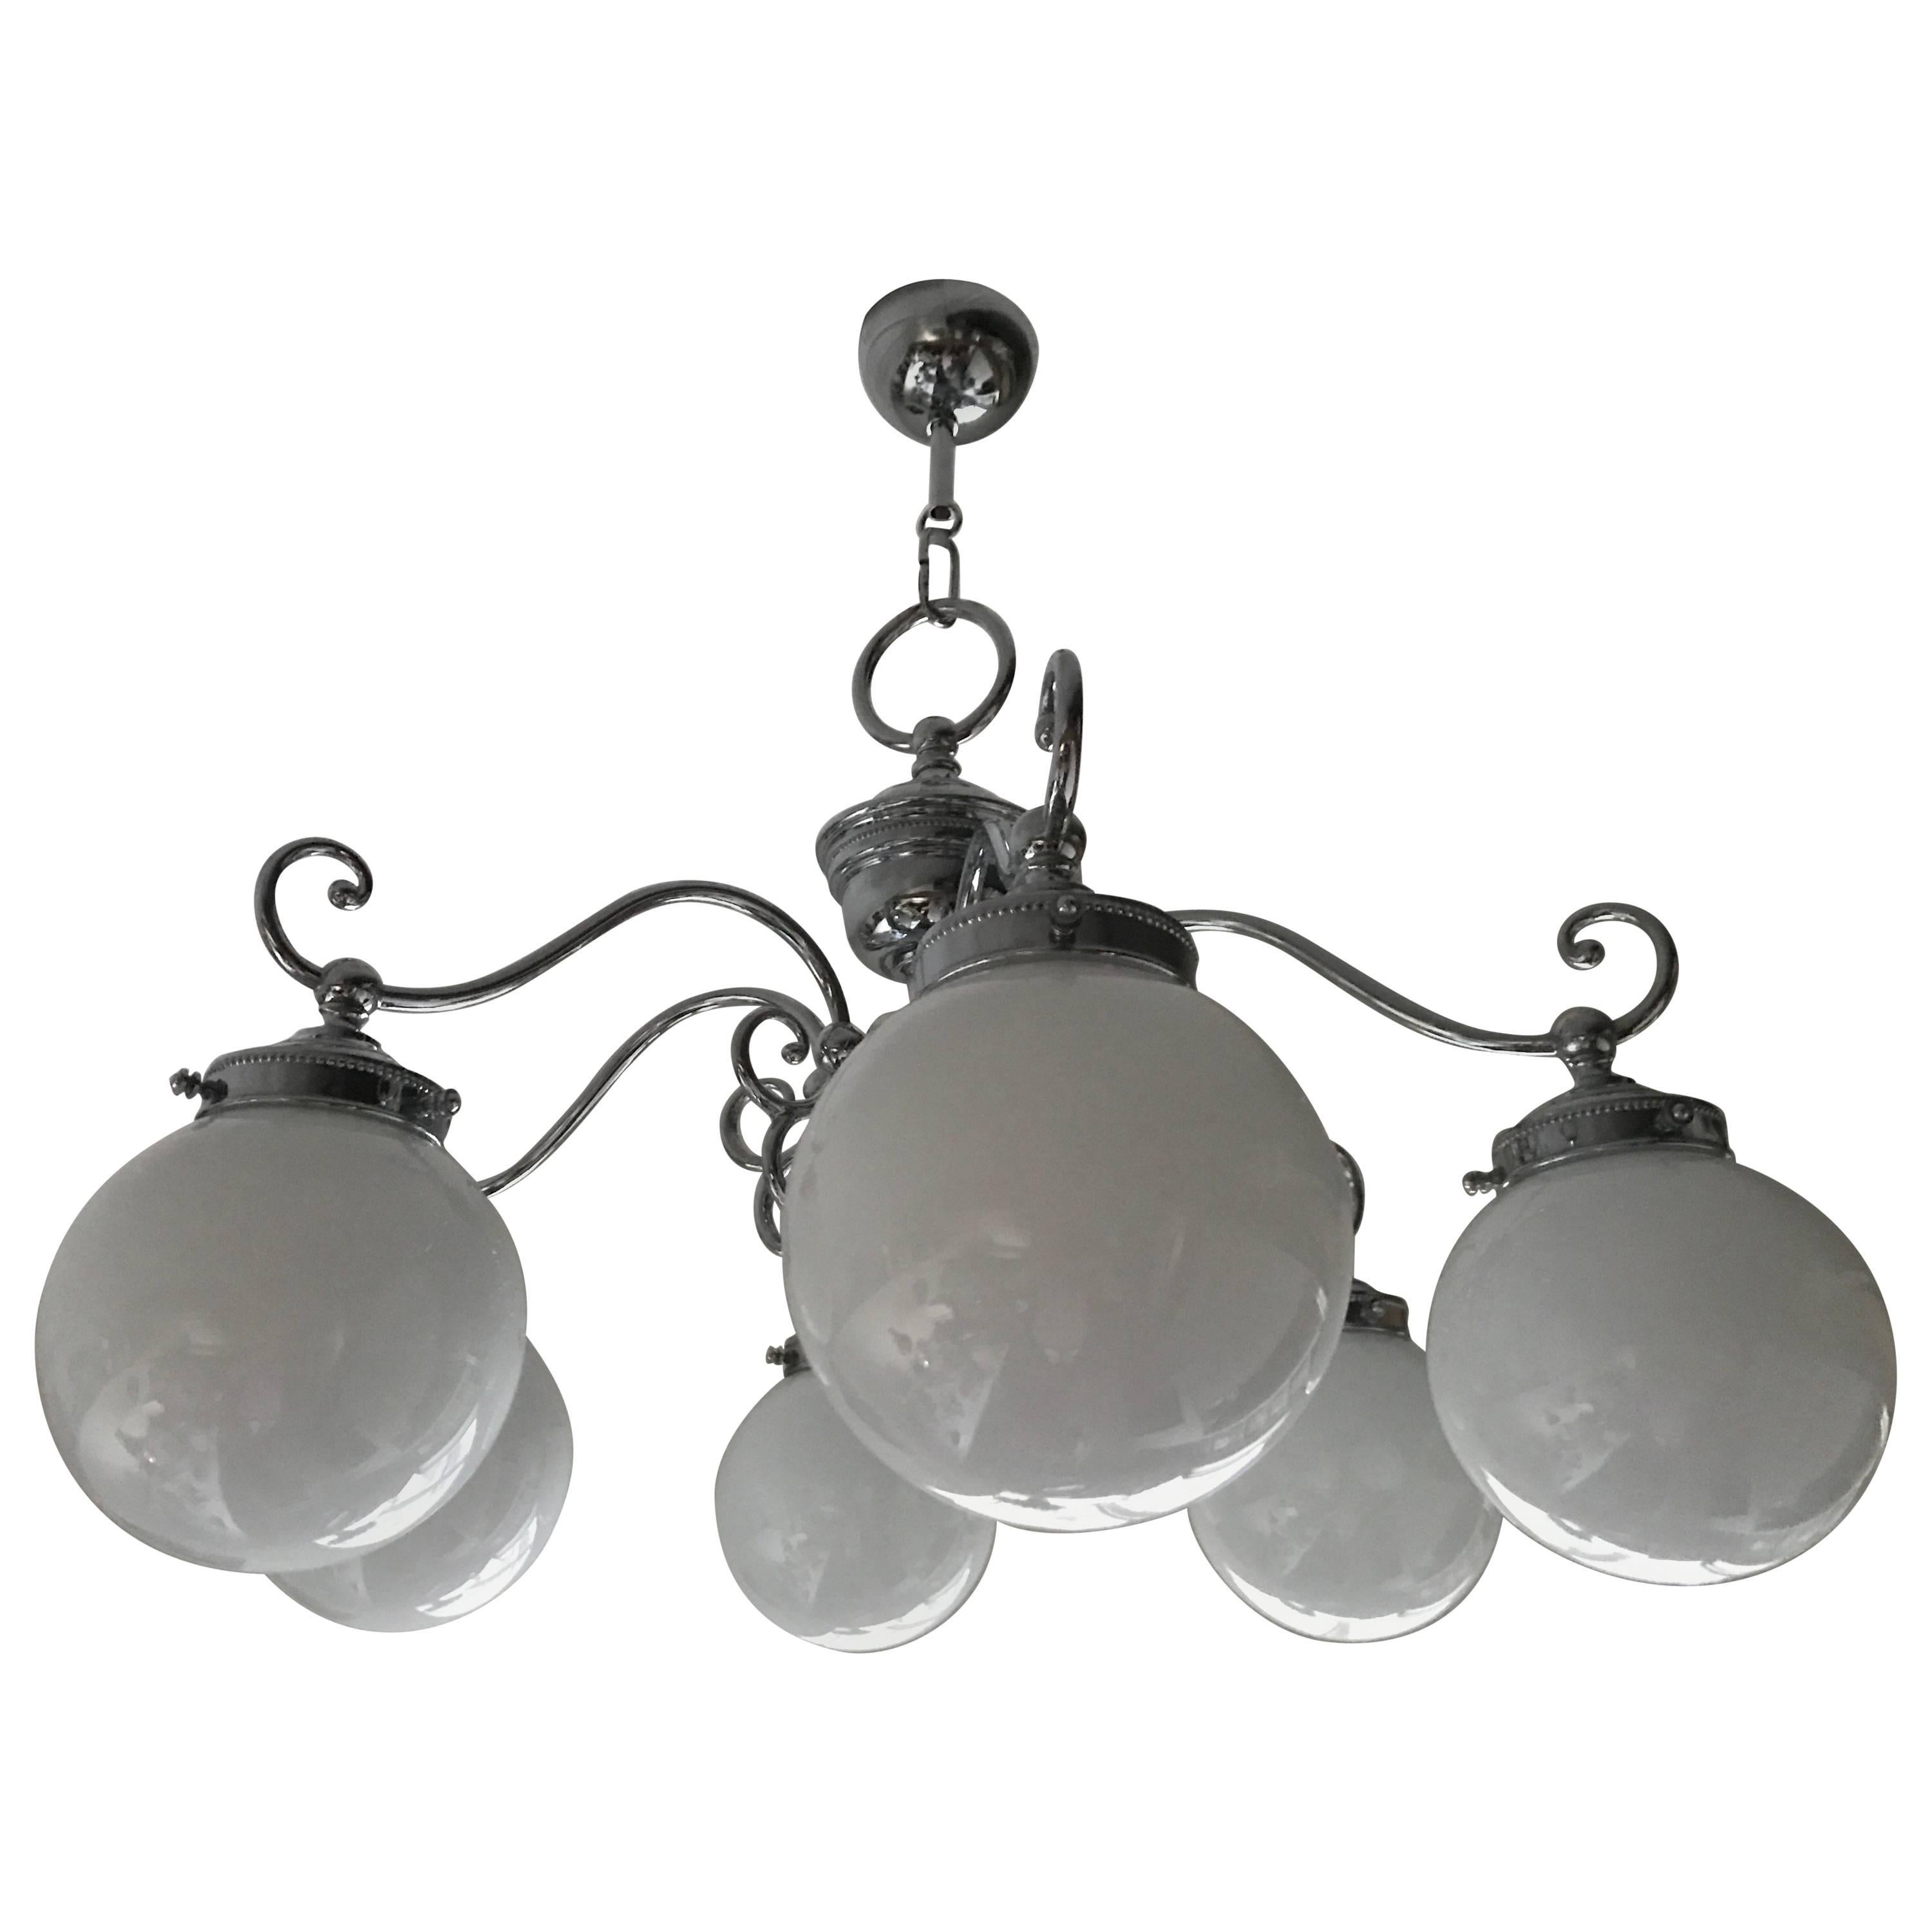 Mid-20th Century Swedish Art Deco Style Chrome and Glass Six-Bulb Chandelier For Sale